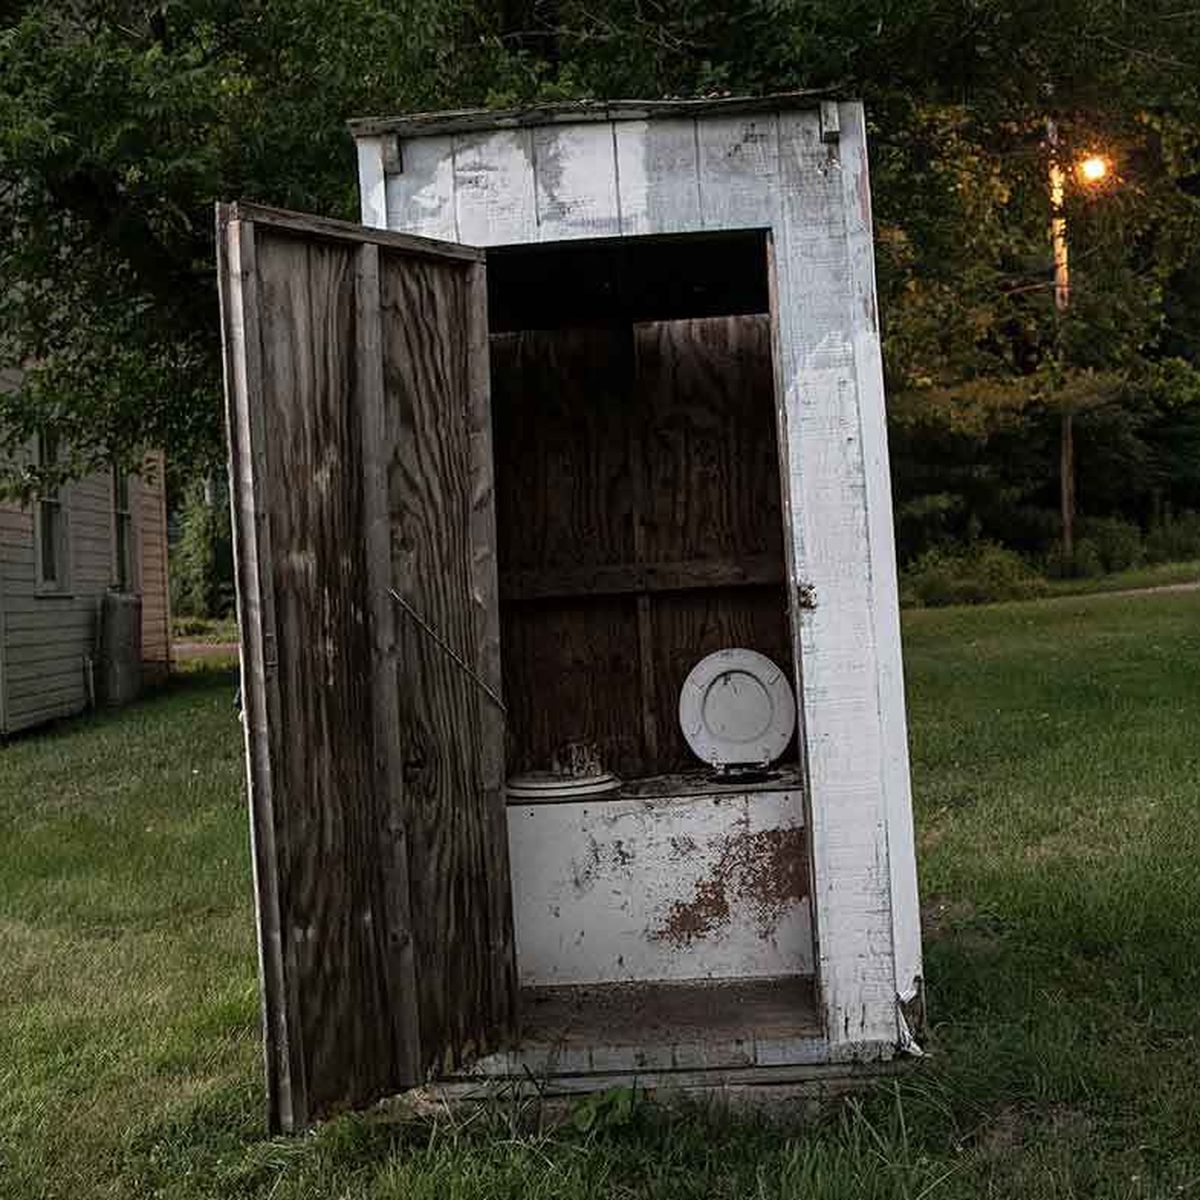 Alaska woman using outhouse attacked by bear, from below